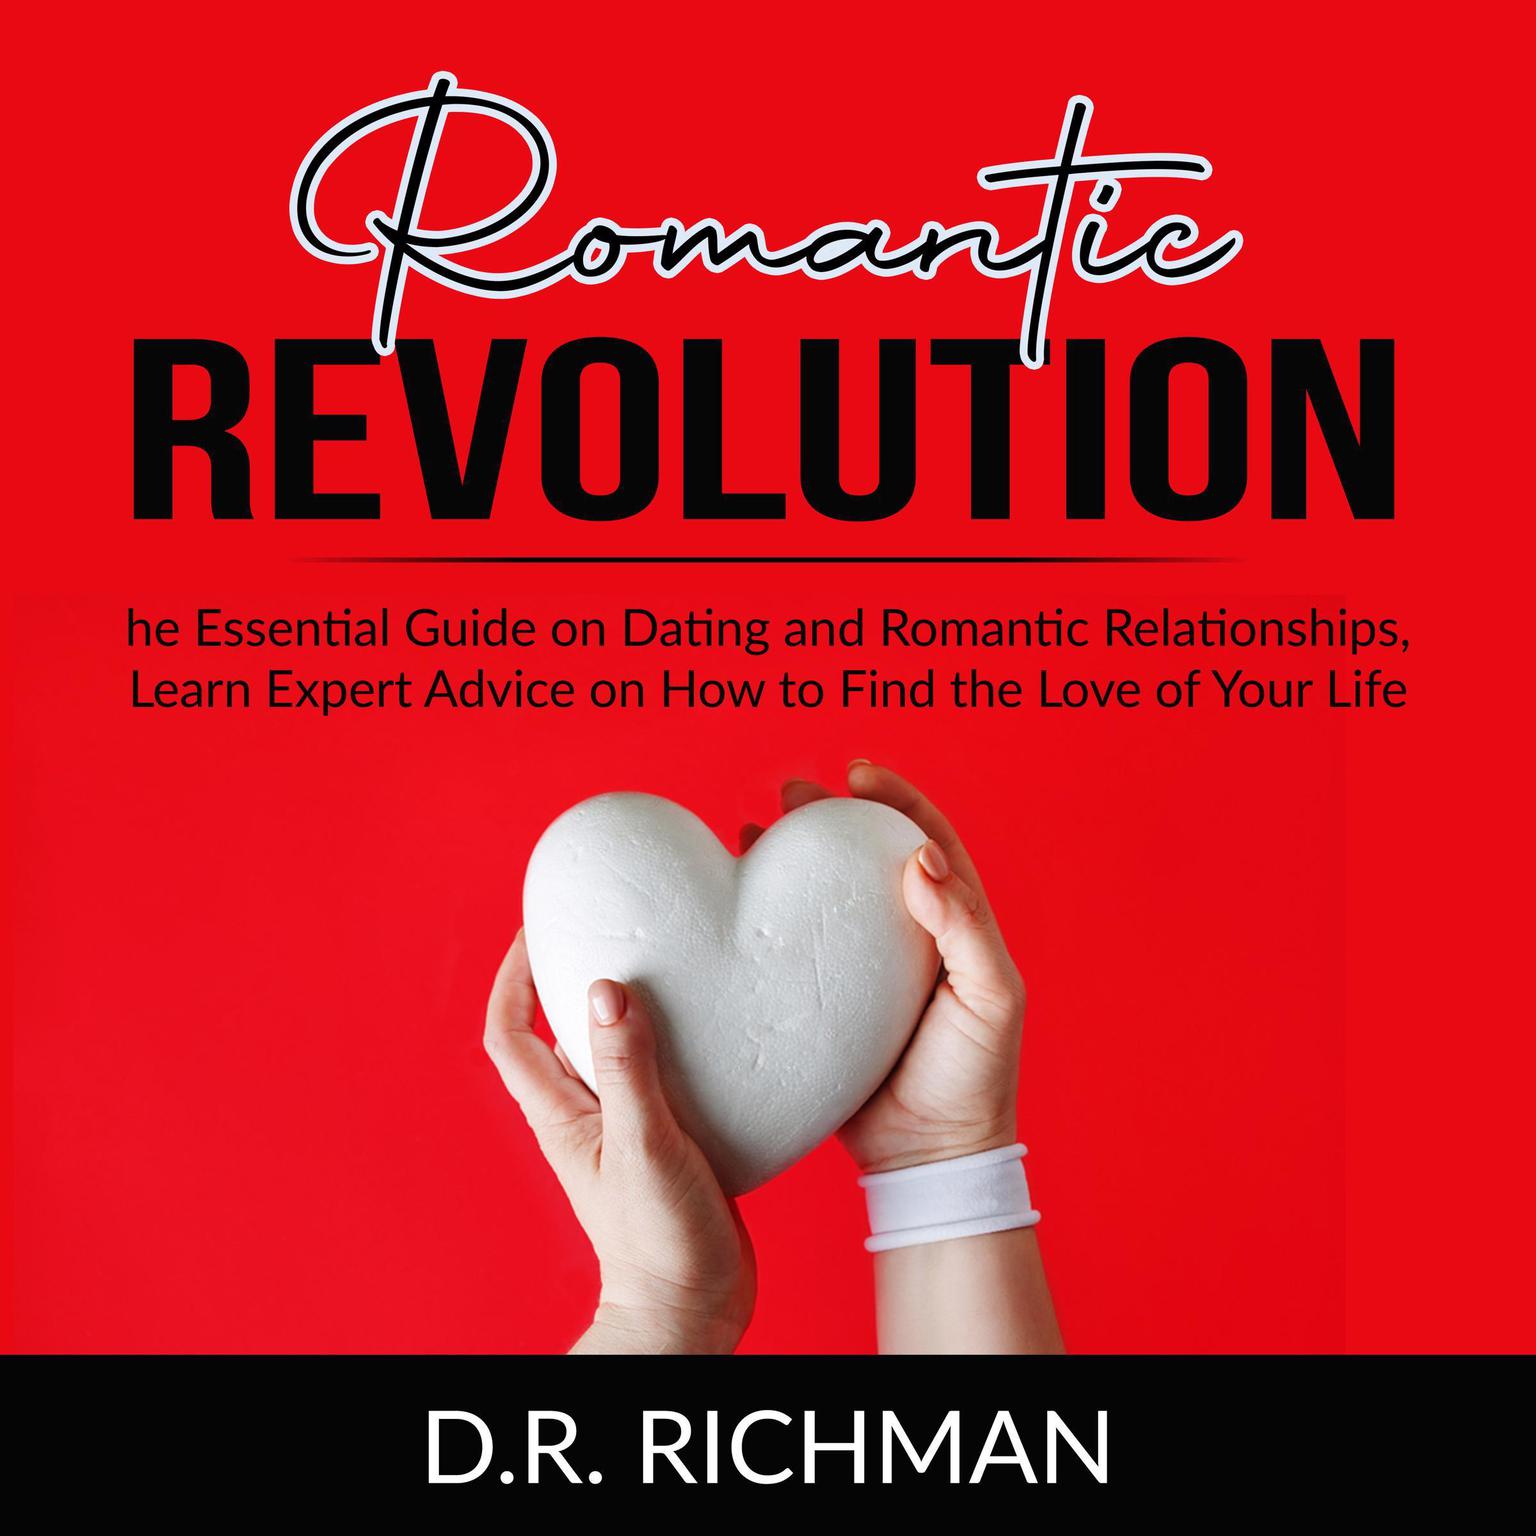 Romantic Revolution: The Essential Guide on Dating and Romantic Relationships, Learn Expert Advice on How to Find the Love of Your Life  Audiobook, by D.R. Richman